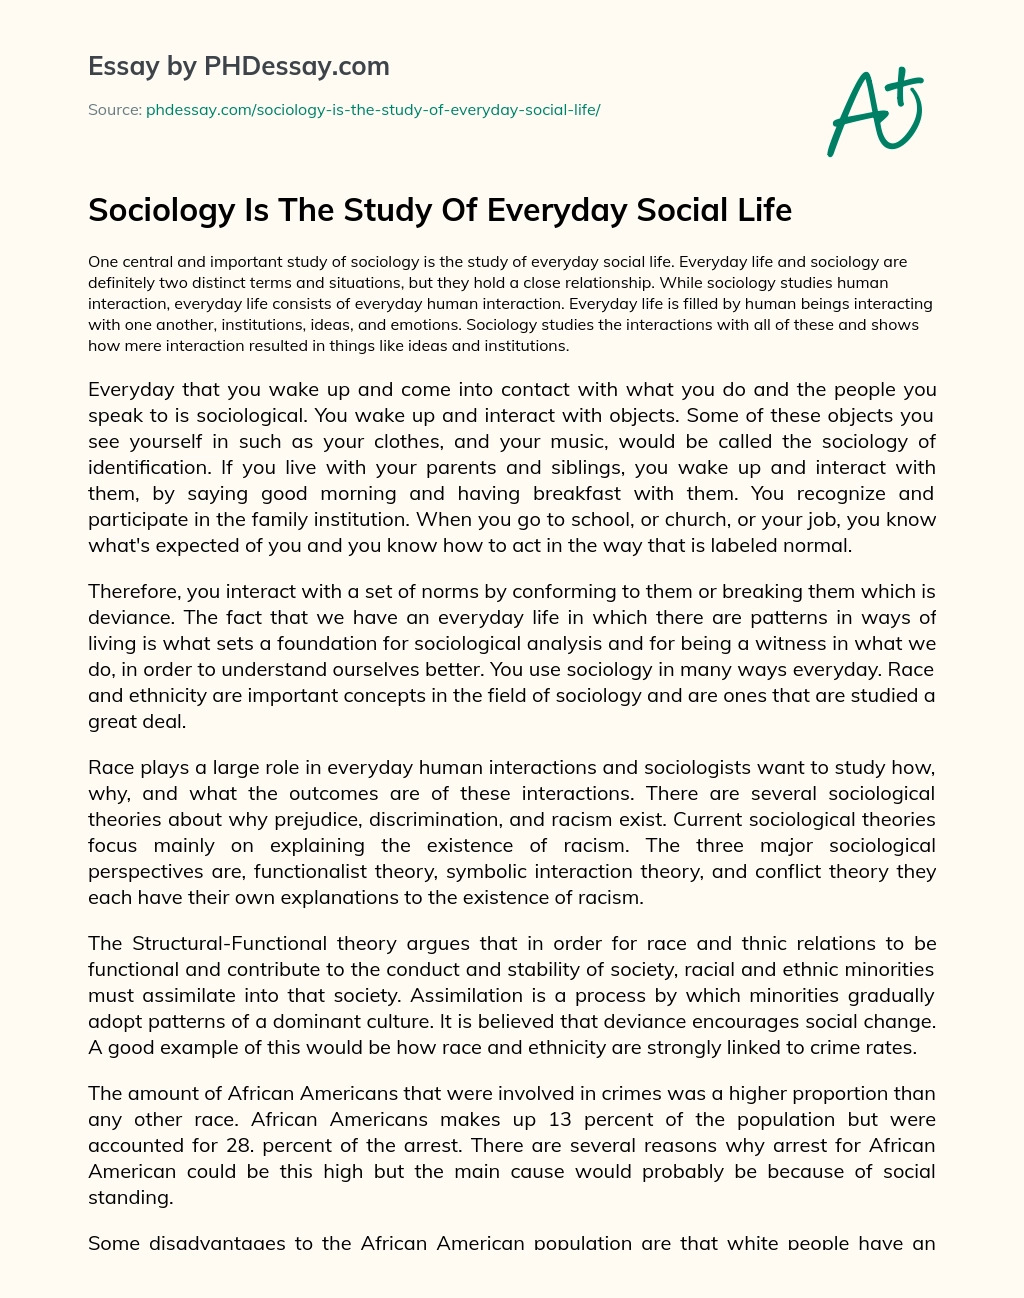 Sociology Is The Study Of Everyday Social Life essay